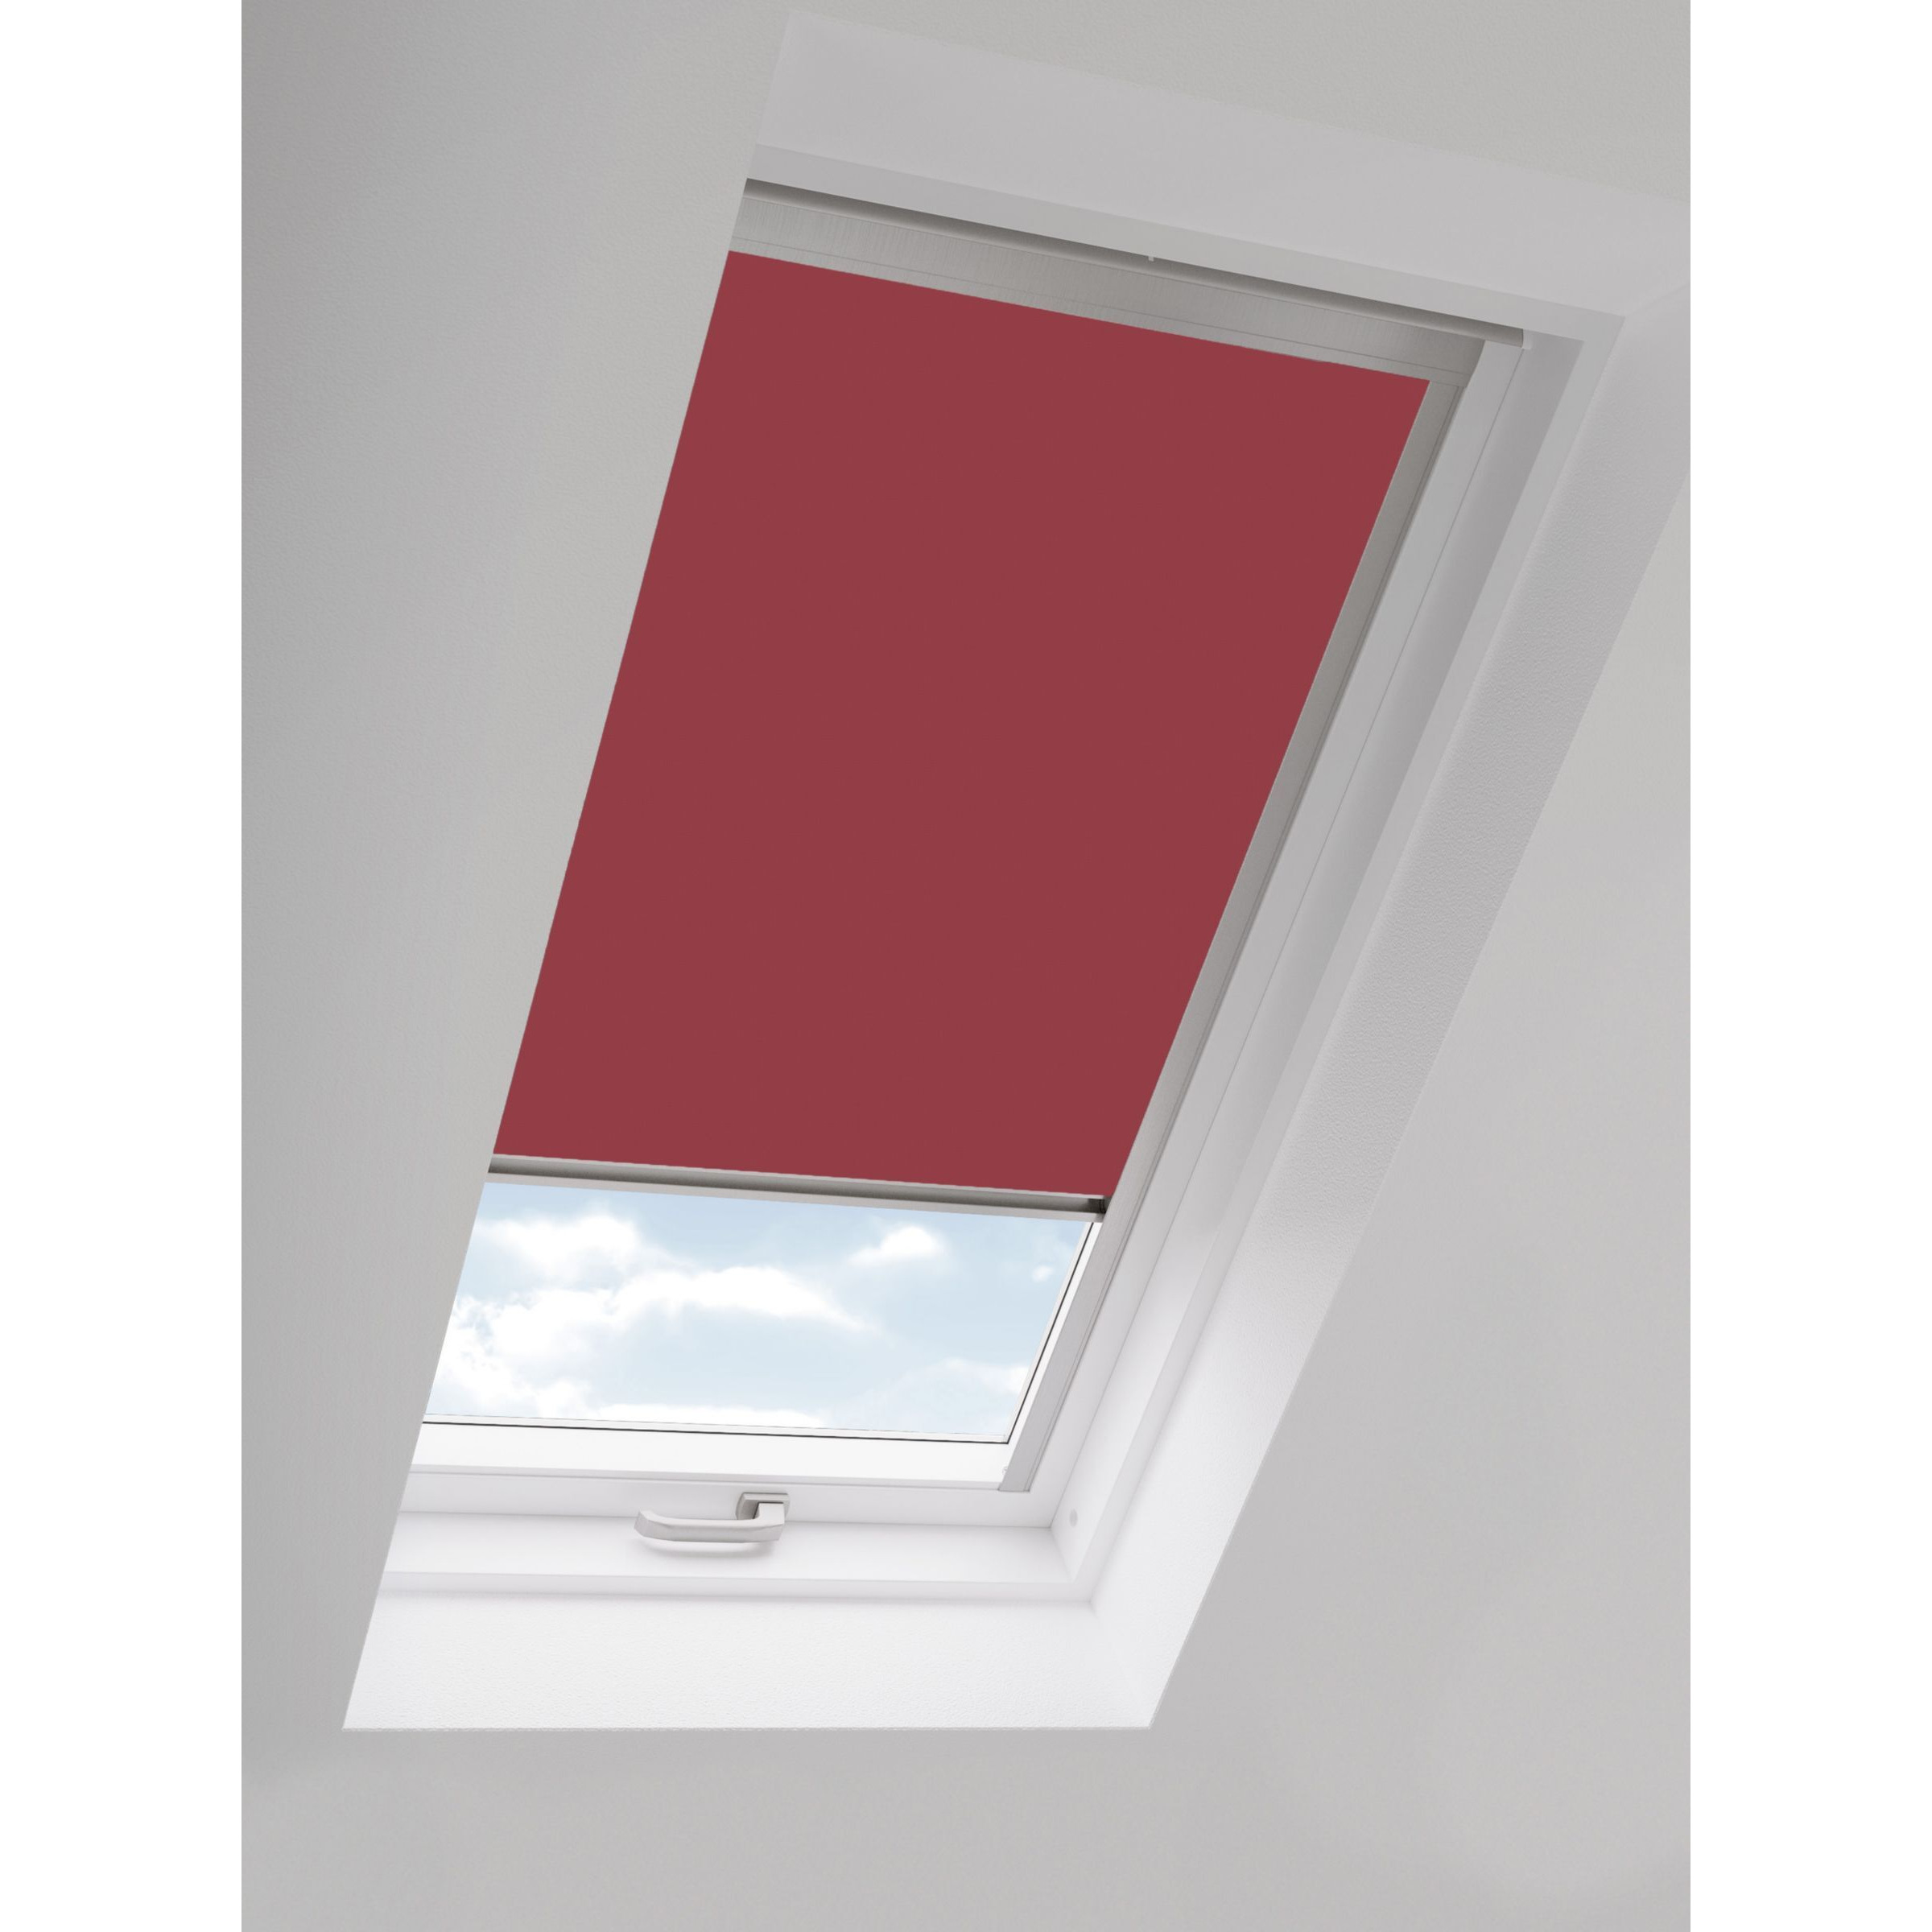 John Lewis Blackout Skylight Blind with Silver Frame, Red - image 1